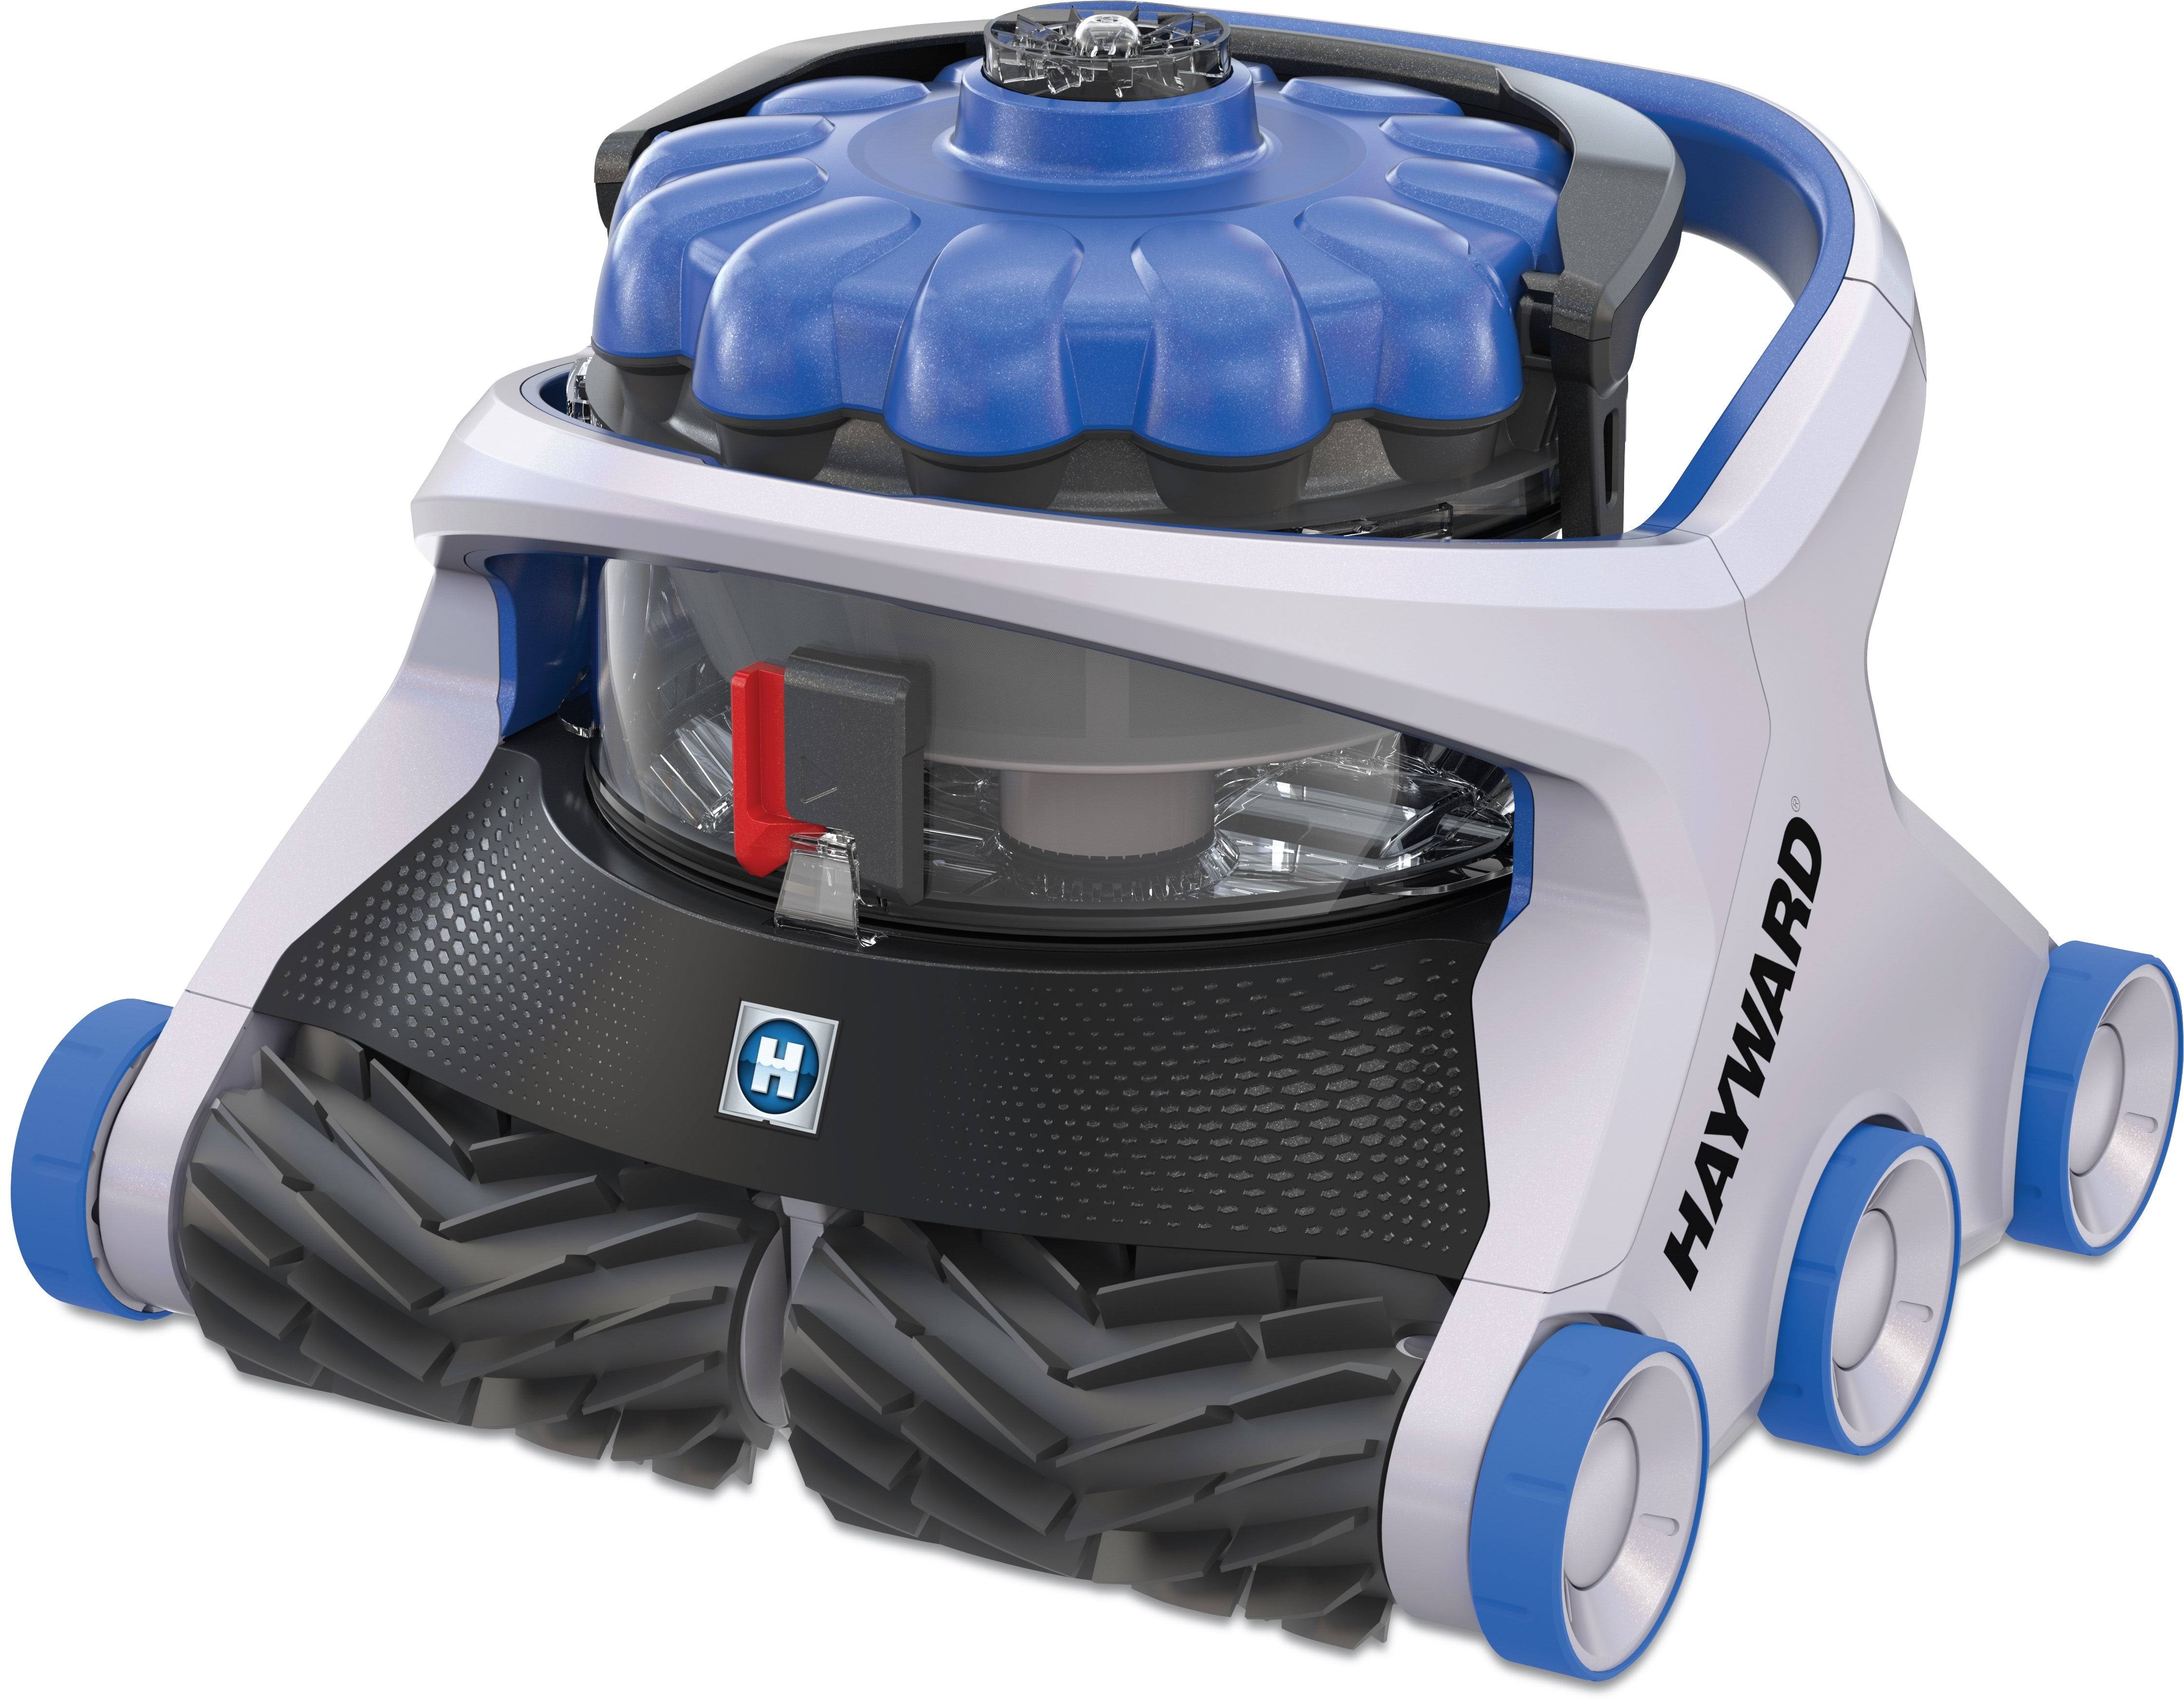 Hayward Aquavac 650 Robot Pool Cleaner with WiFi and Trolley